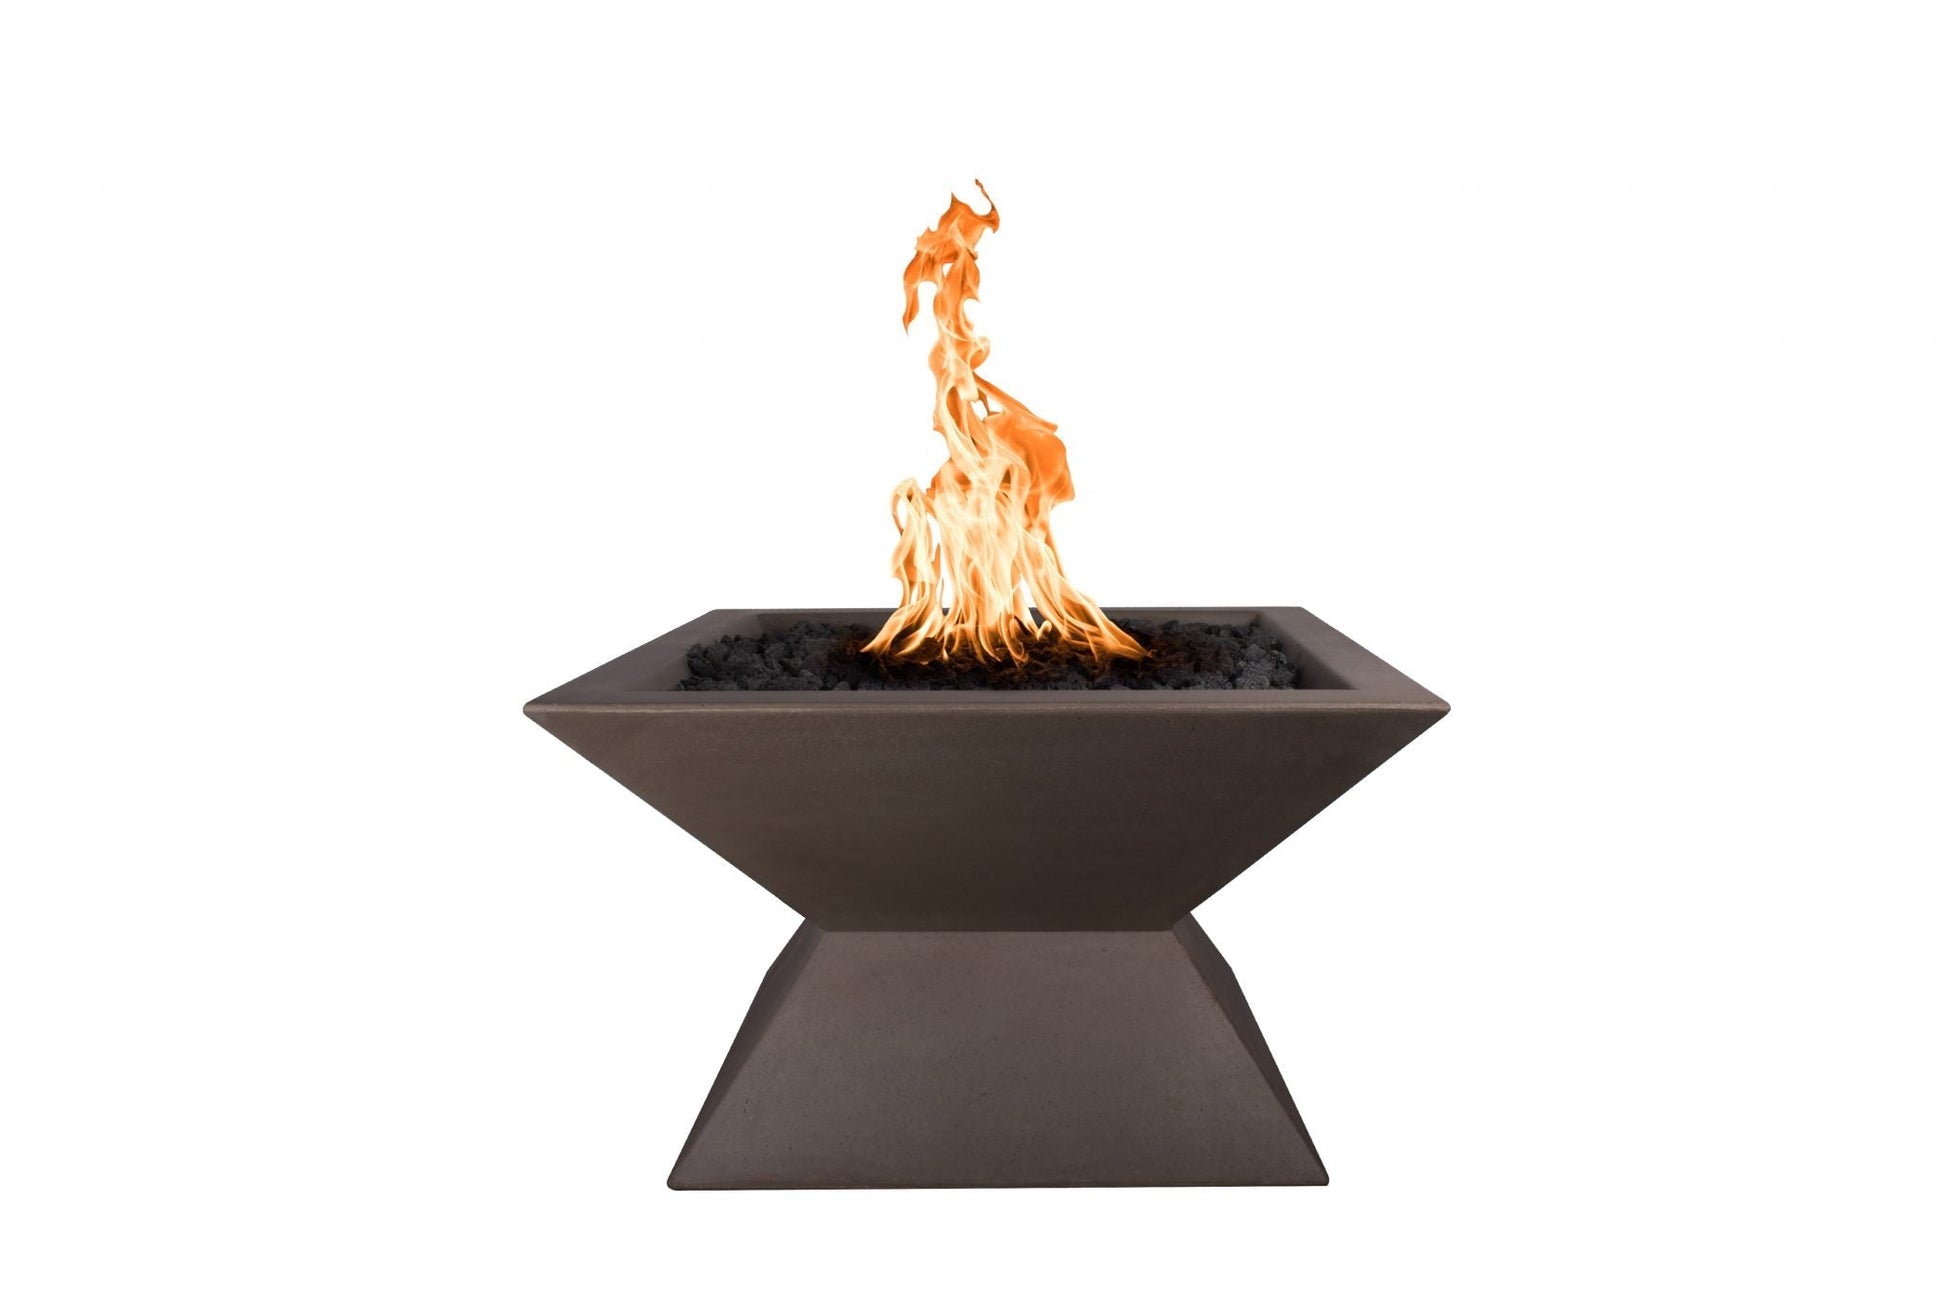 The Outdoor Plus Square Uxmal 30" Rustic Gray GFRC Concrete Liquid Propane Fire Pit with Match Lit Ignition